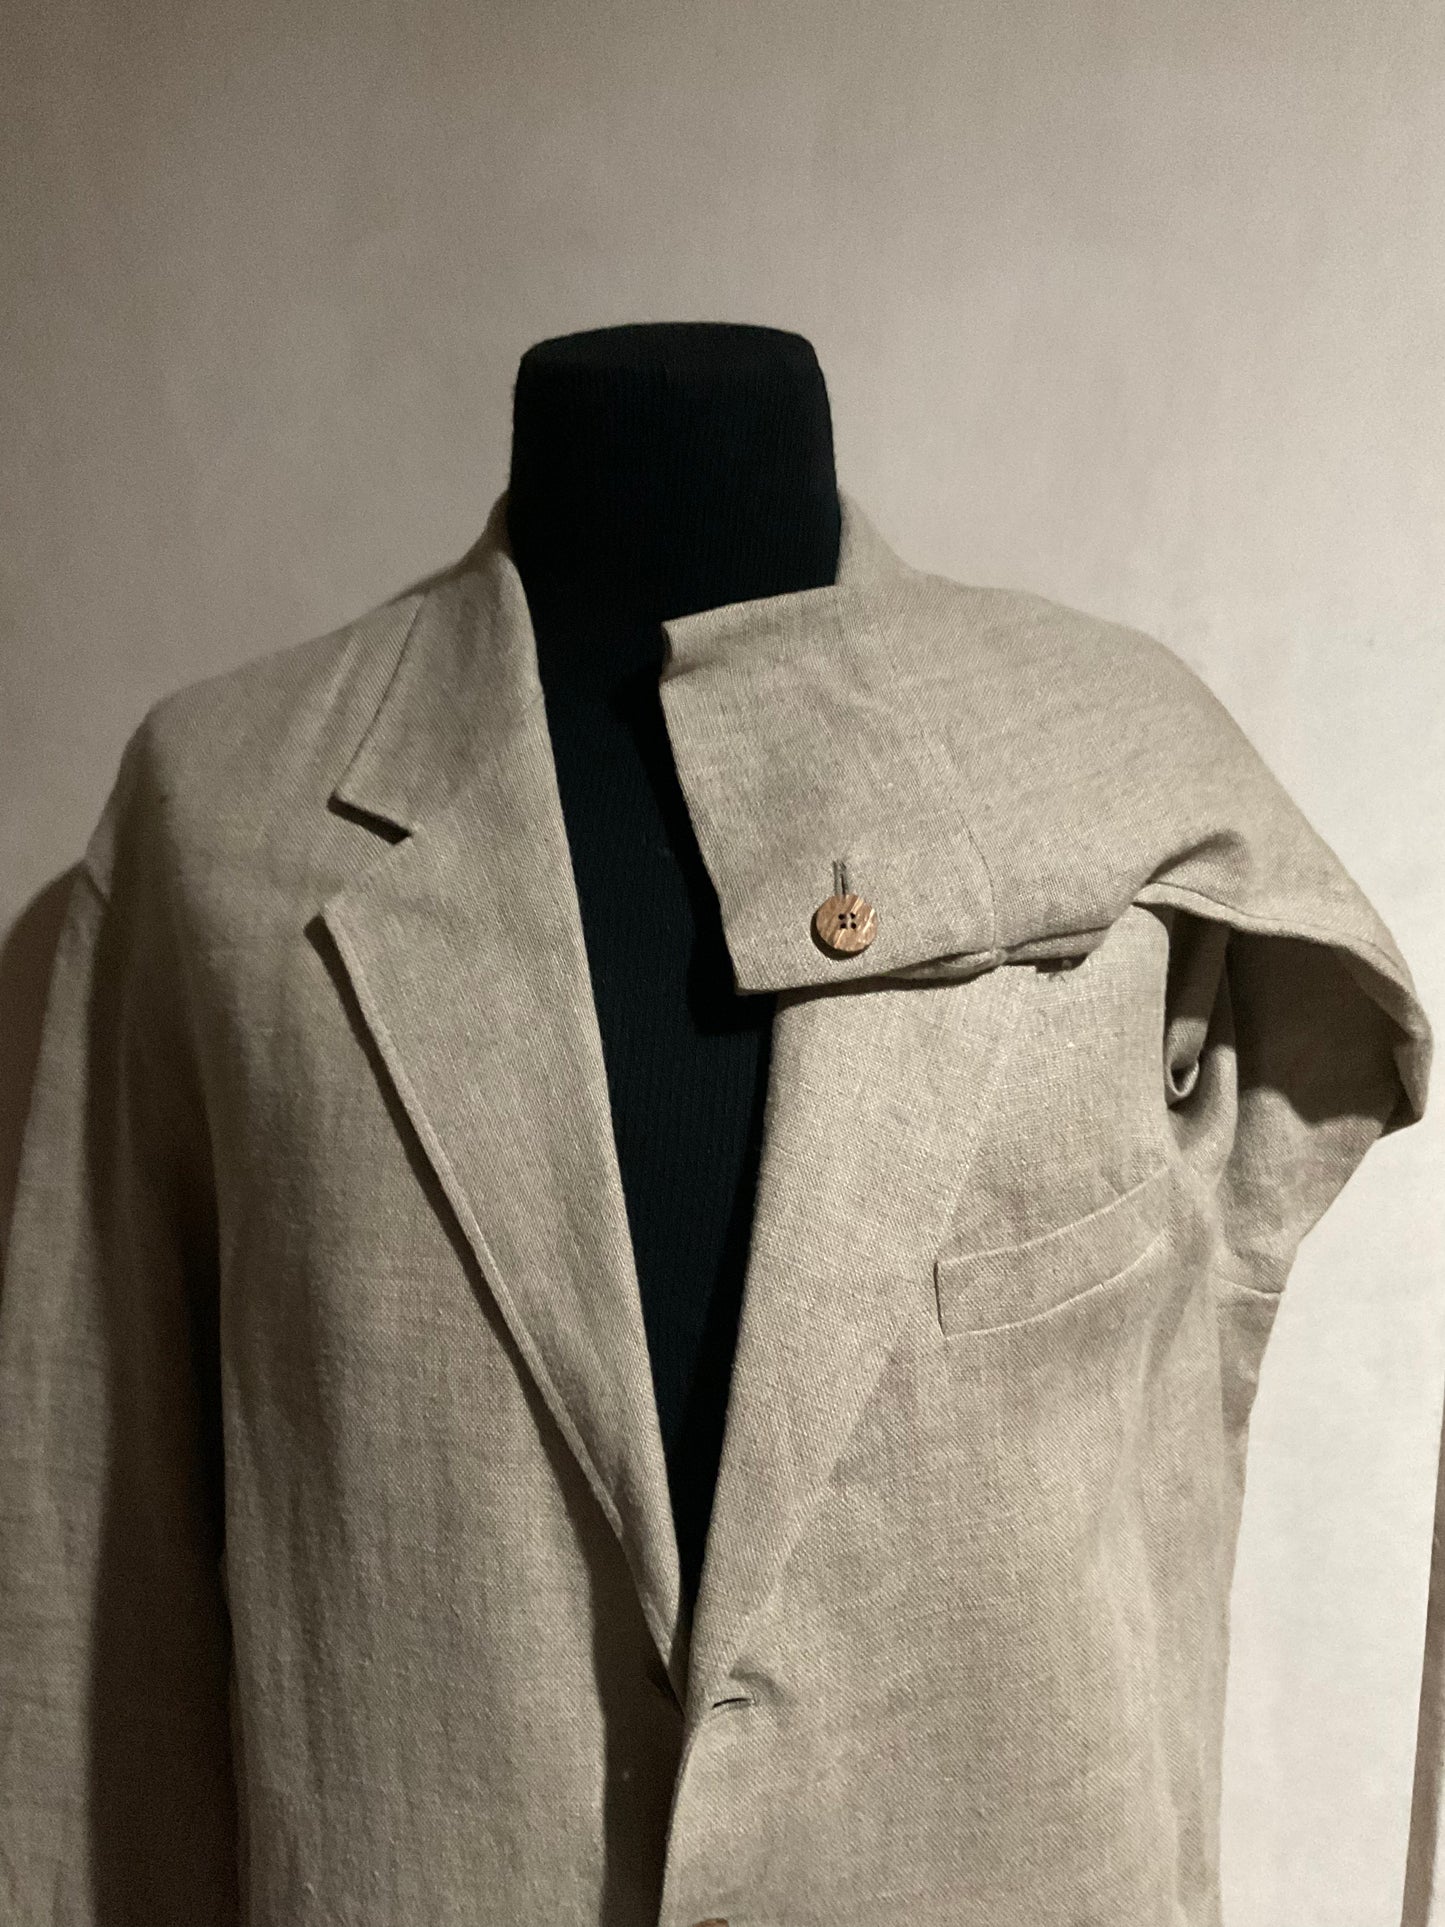 R P SPORTS JACKET / NATURAL LINEN / UNCONSTRUCTED / MEDIUM - LARGE / NEW / MADE IN ITALY